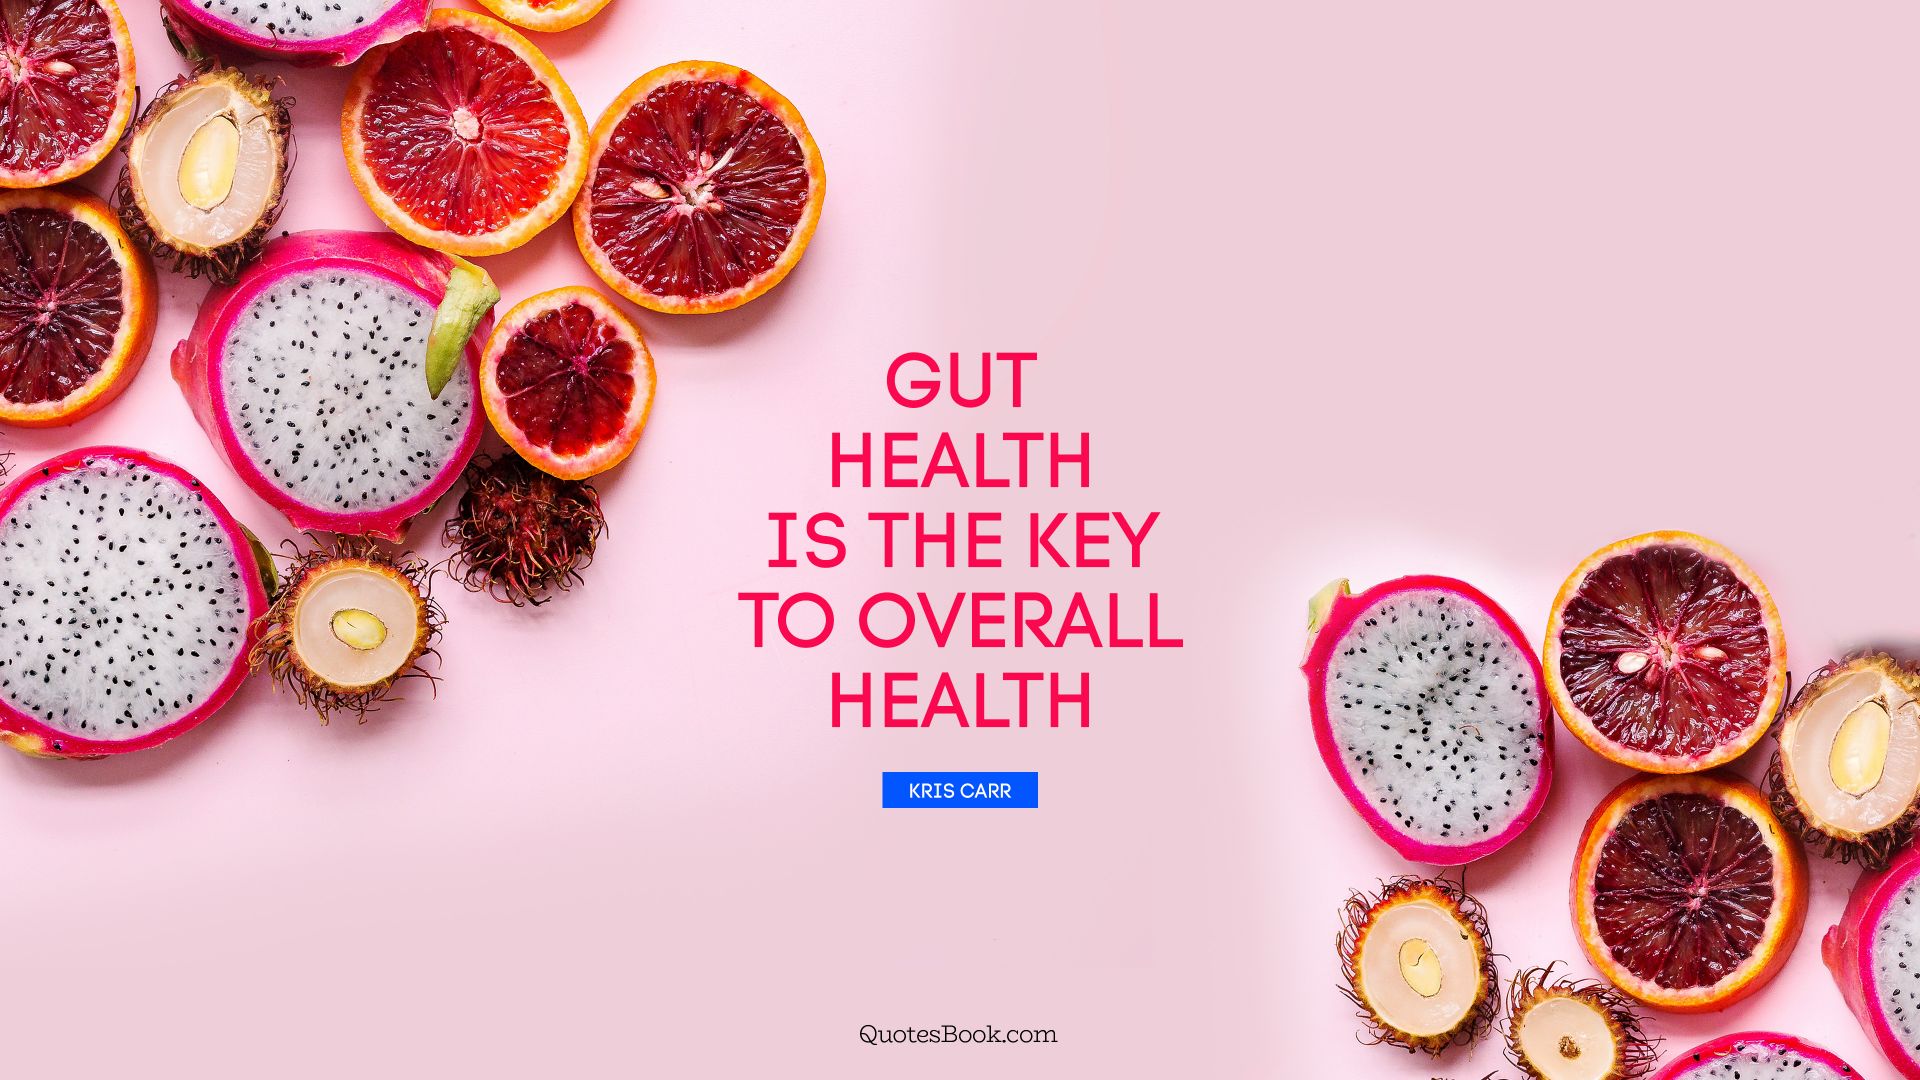 Gut health is the key to overall health. - Quote by Kris Carr